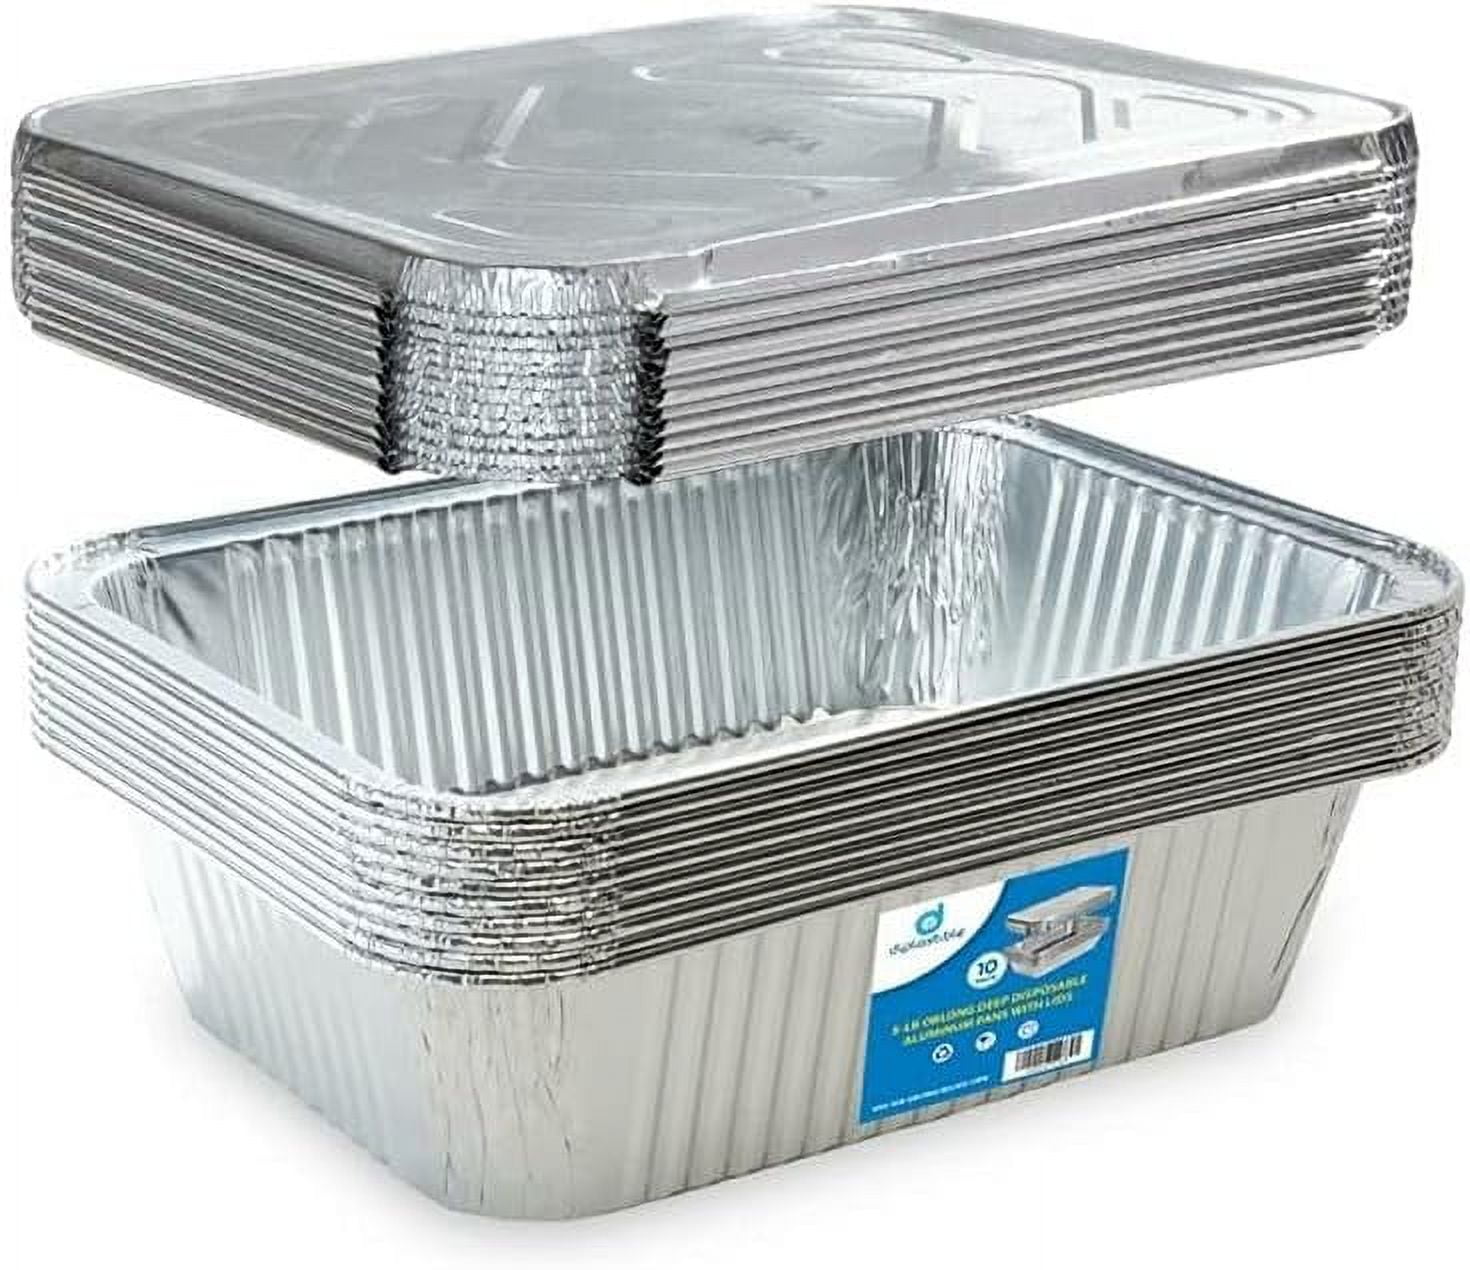 Hot Selling Disposable Baking Pan Food Aluminum Foil Containers